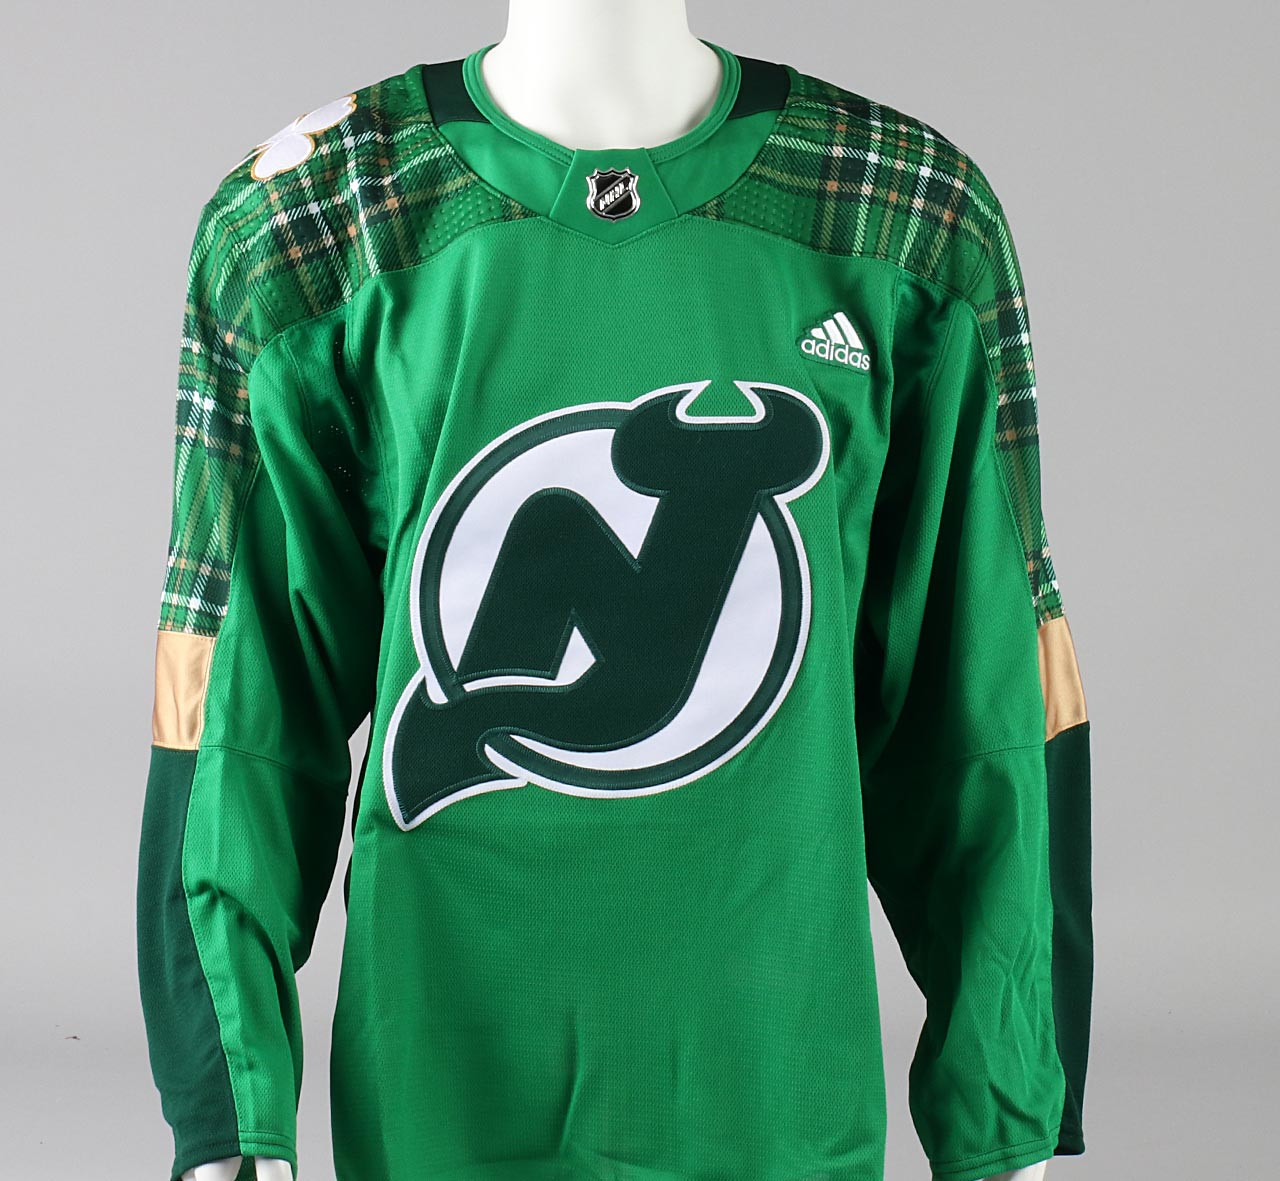 Game Jersey - New Jersey Devils - Green Adidas Size 56 - Pro Stock Hockey